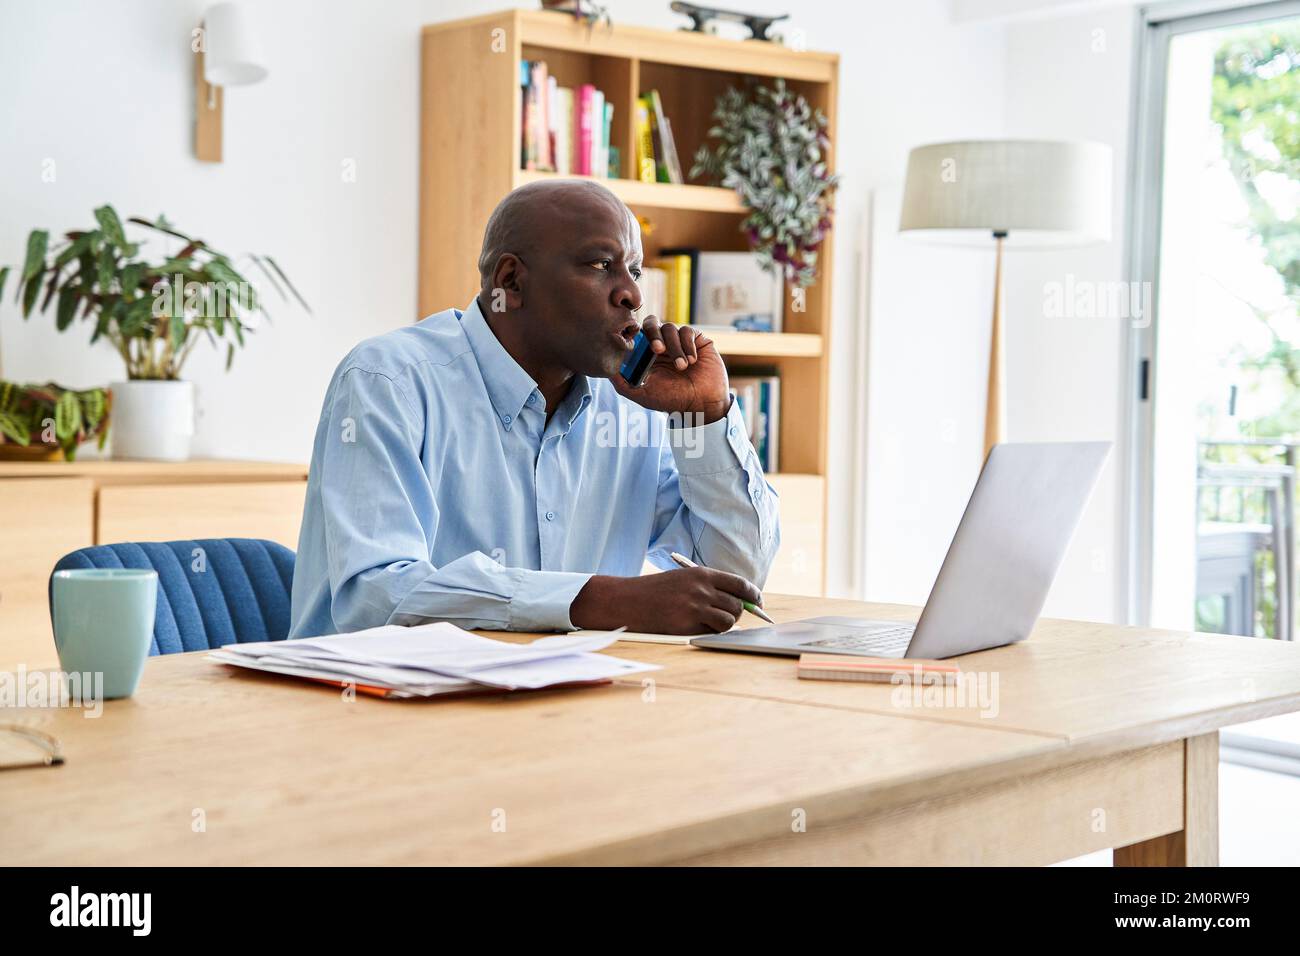 Middle-aged African-American man making phone call while working at home with laptop computer Stock Photo